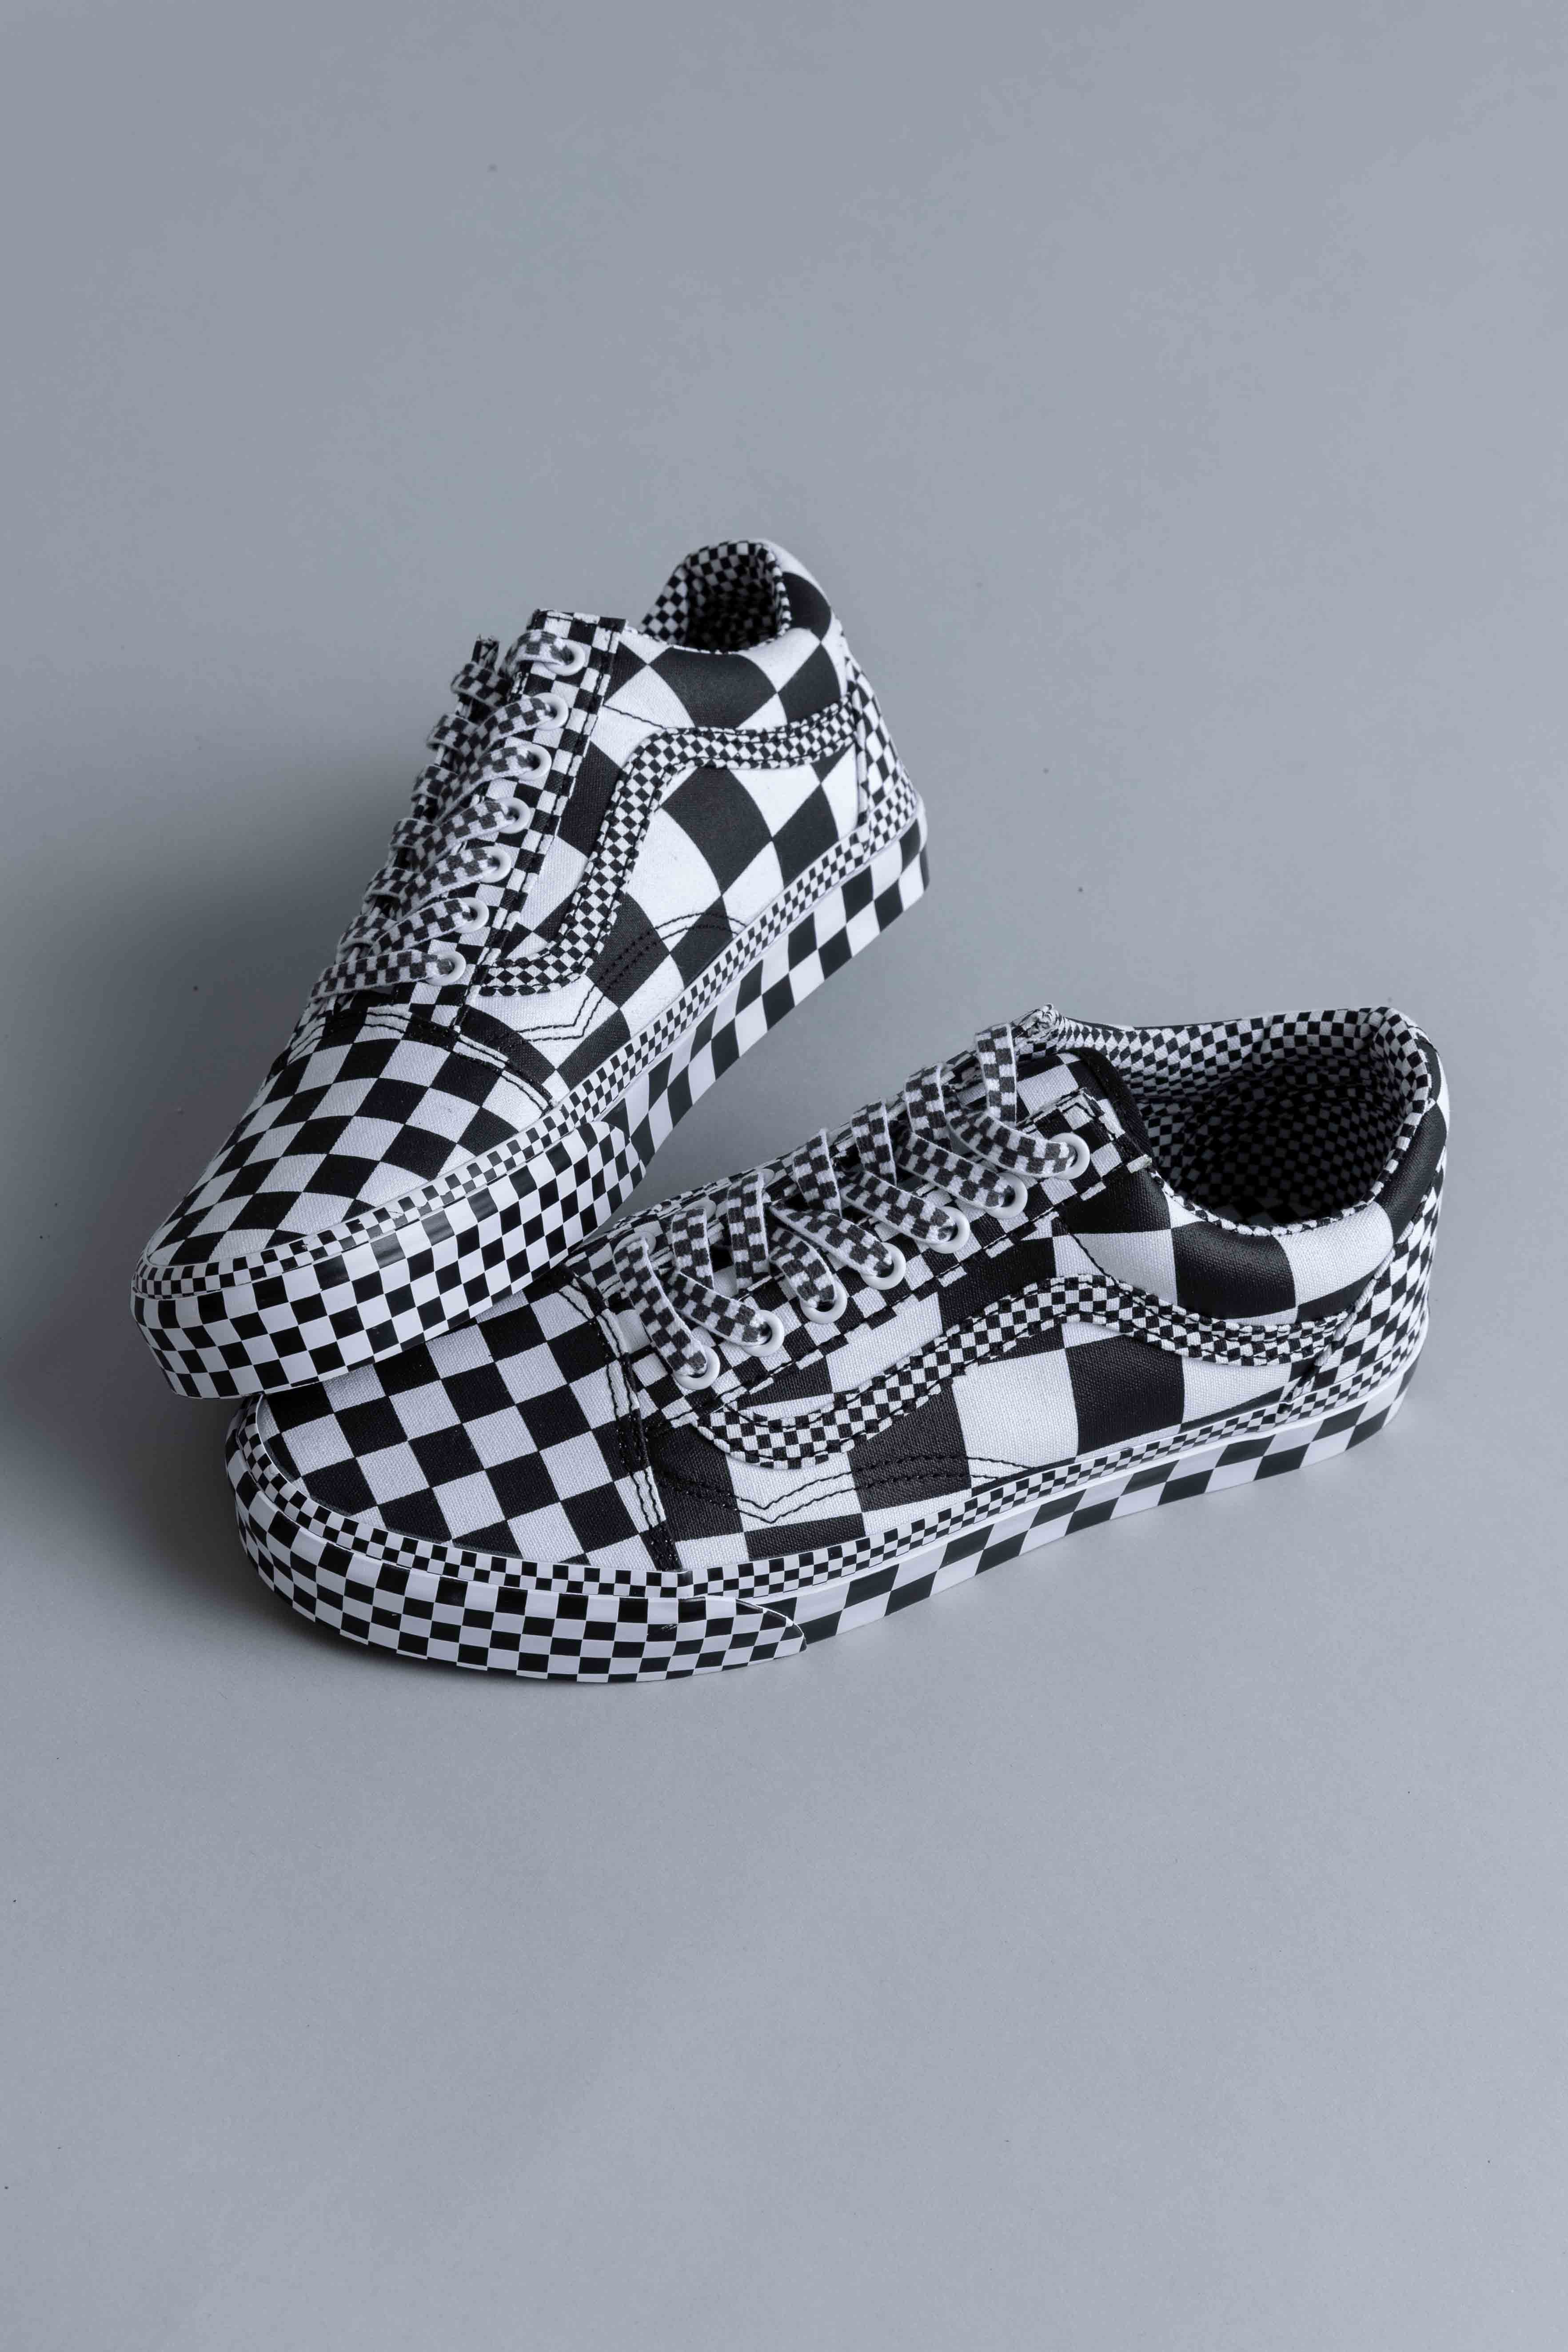 checkered vans all over